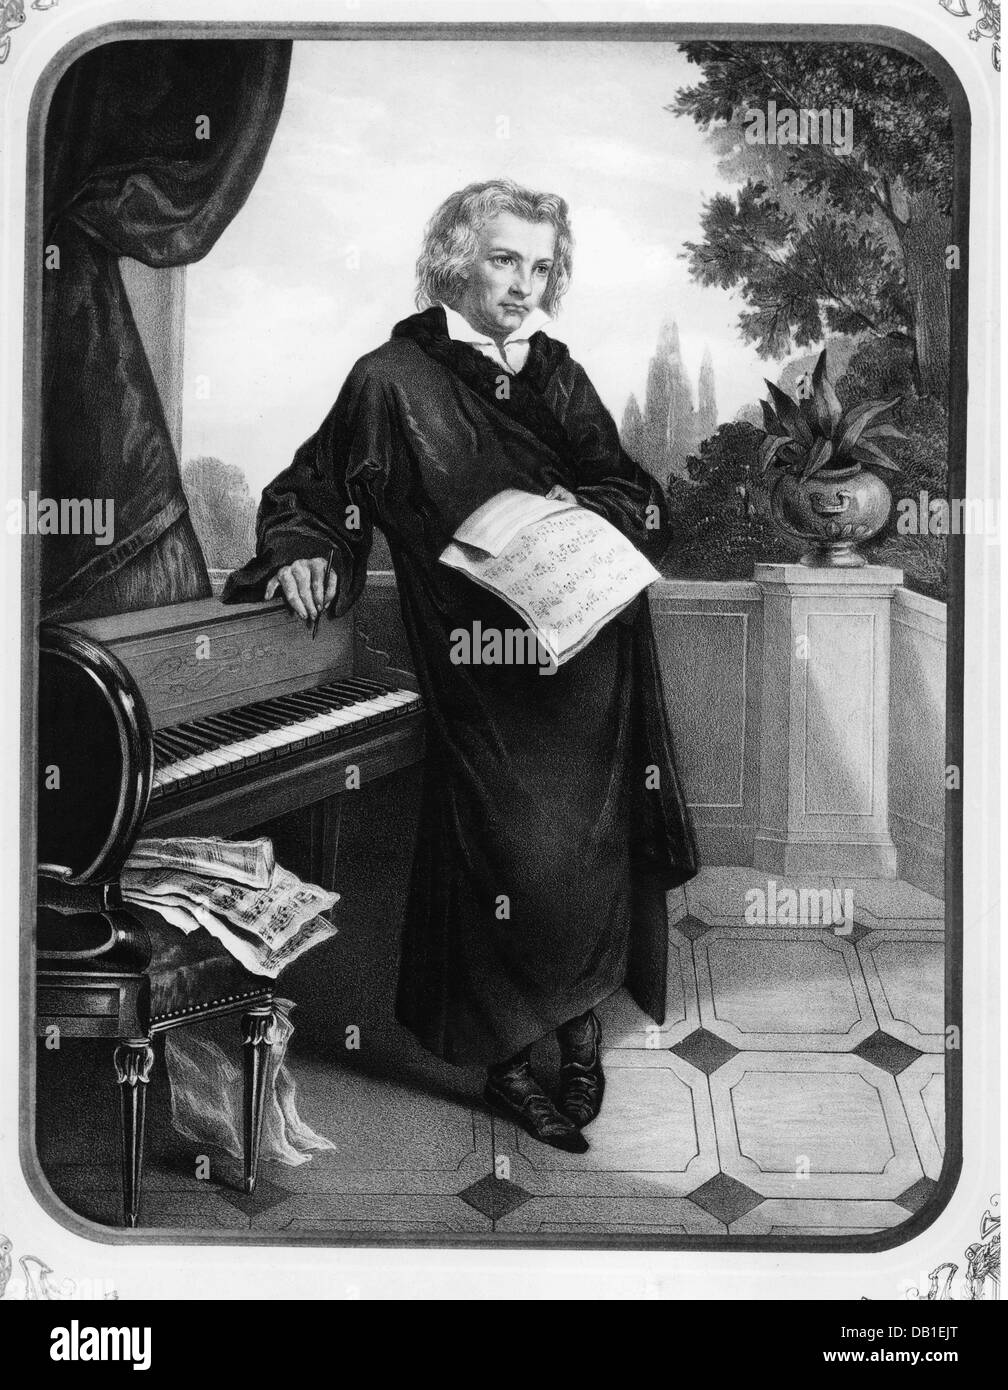 Beethoven, Ludwig van, 17.12. 1770 - 26.3.1827, German composer, full length, lithograph, 1st half 19th century, Stock Photo